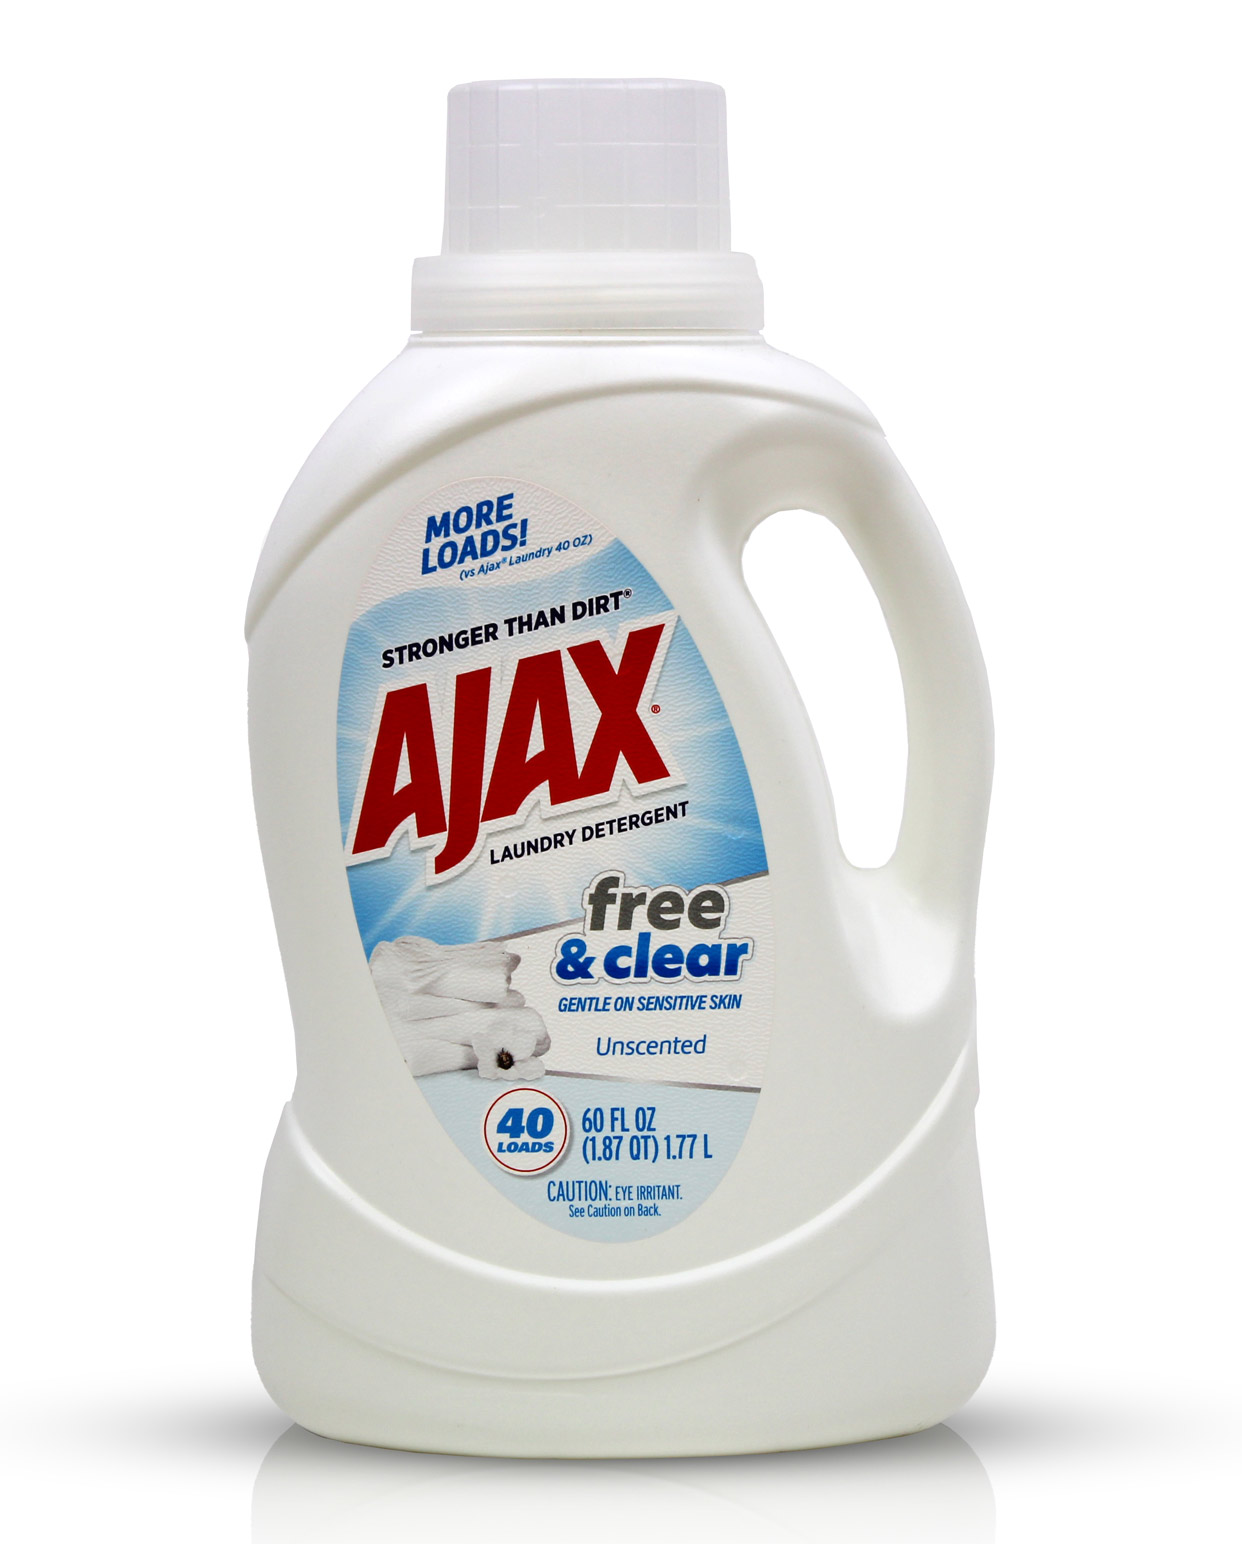 60oz bottle of AJAX Sensitive skin laundry detergent with a clear label.